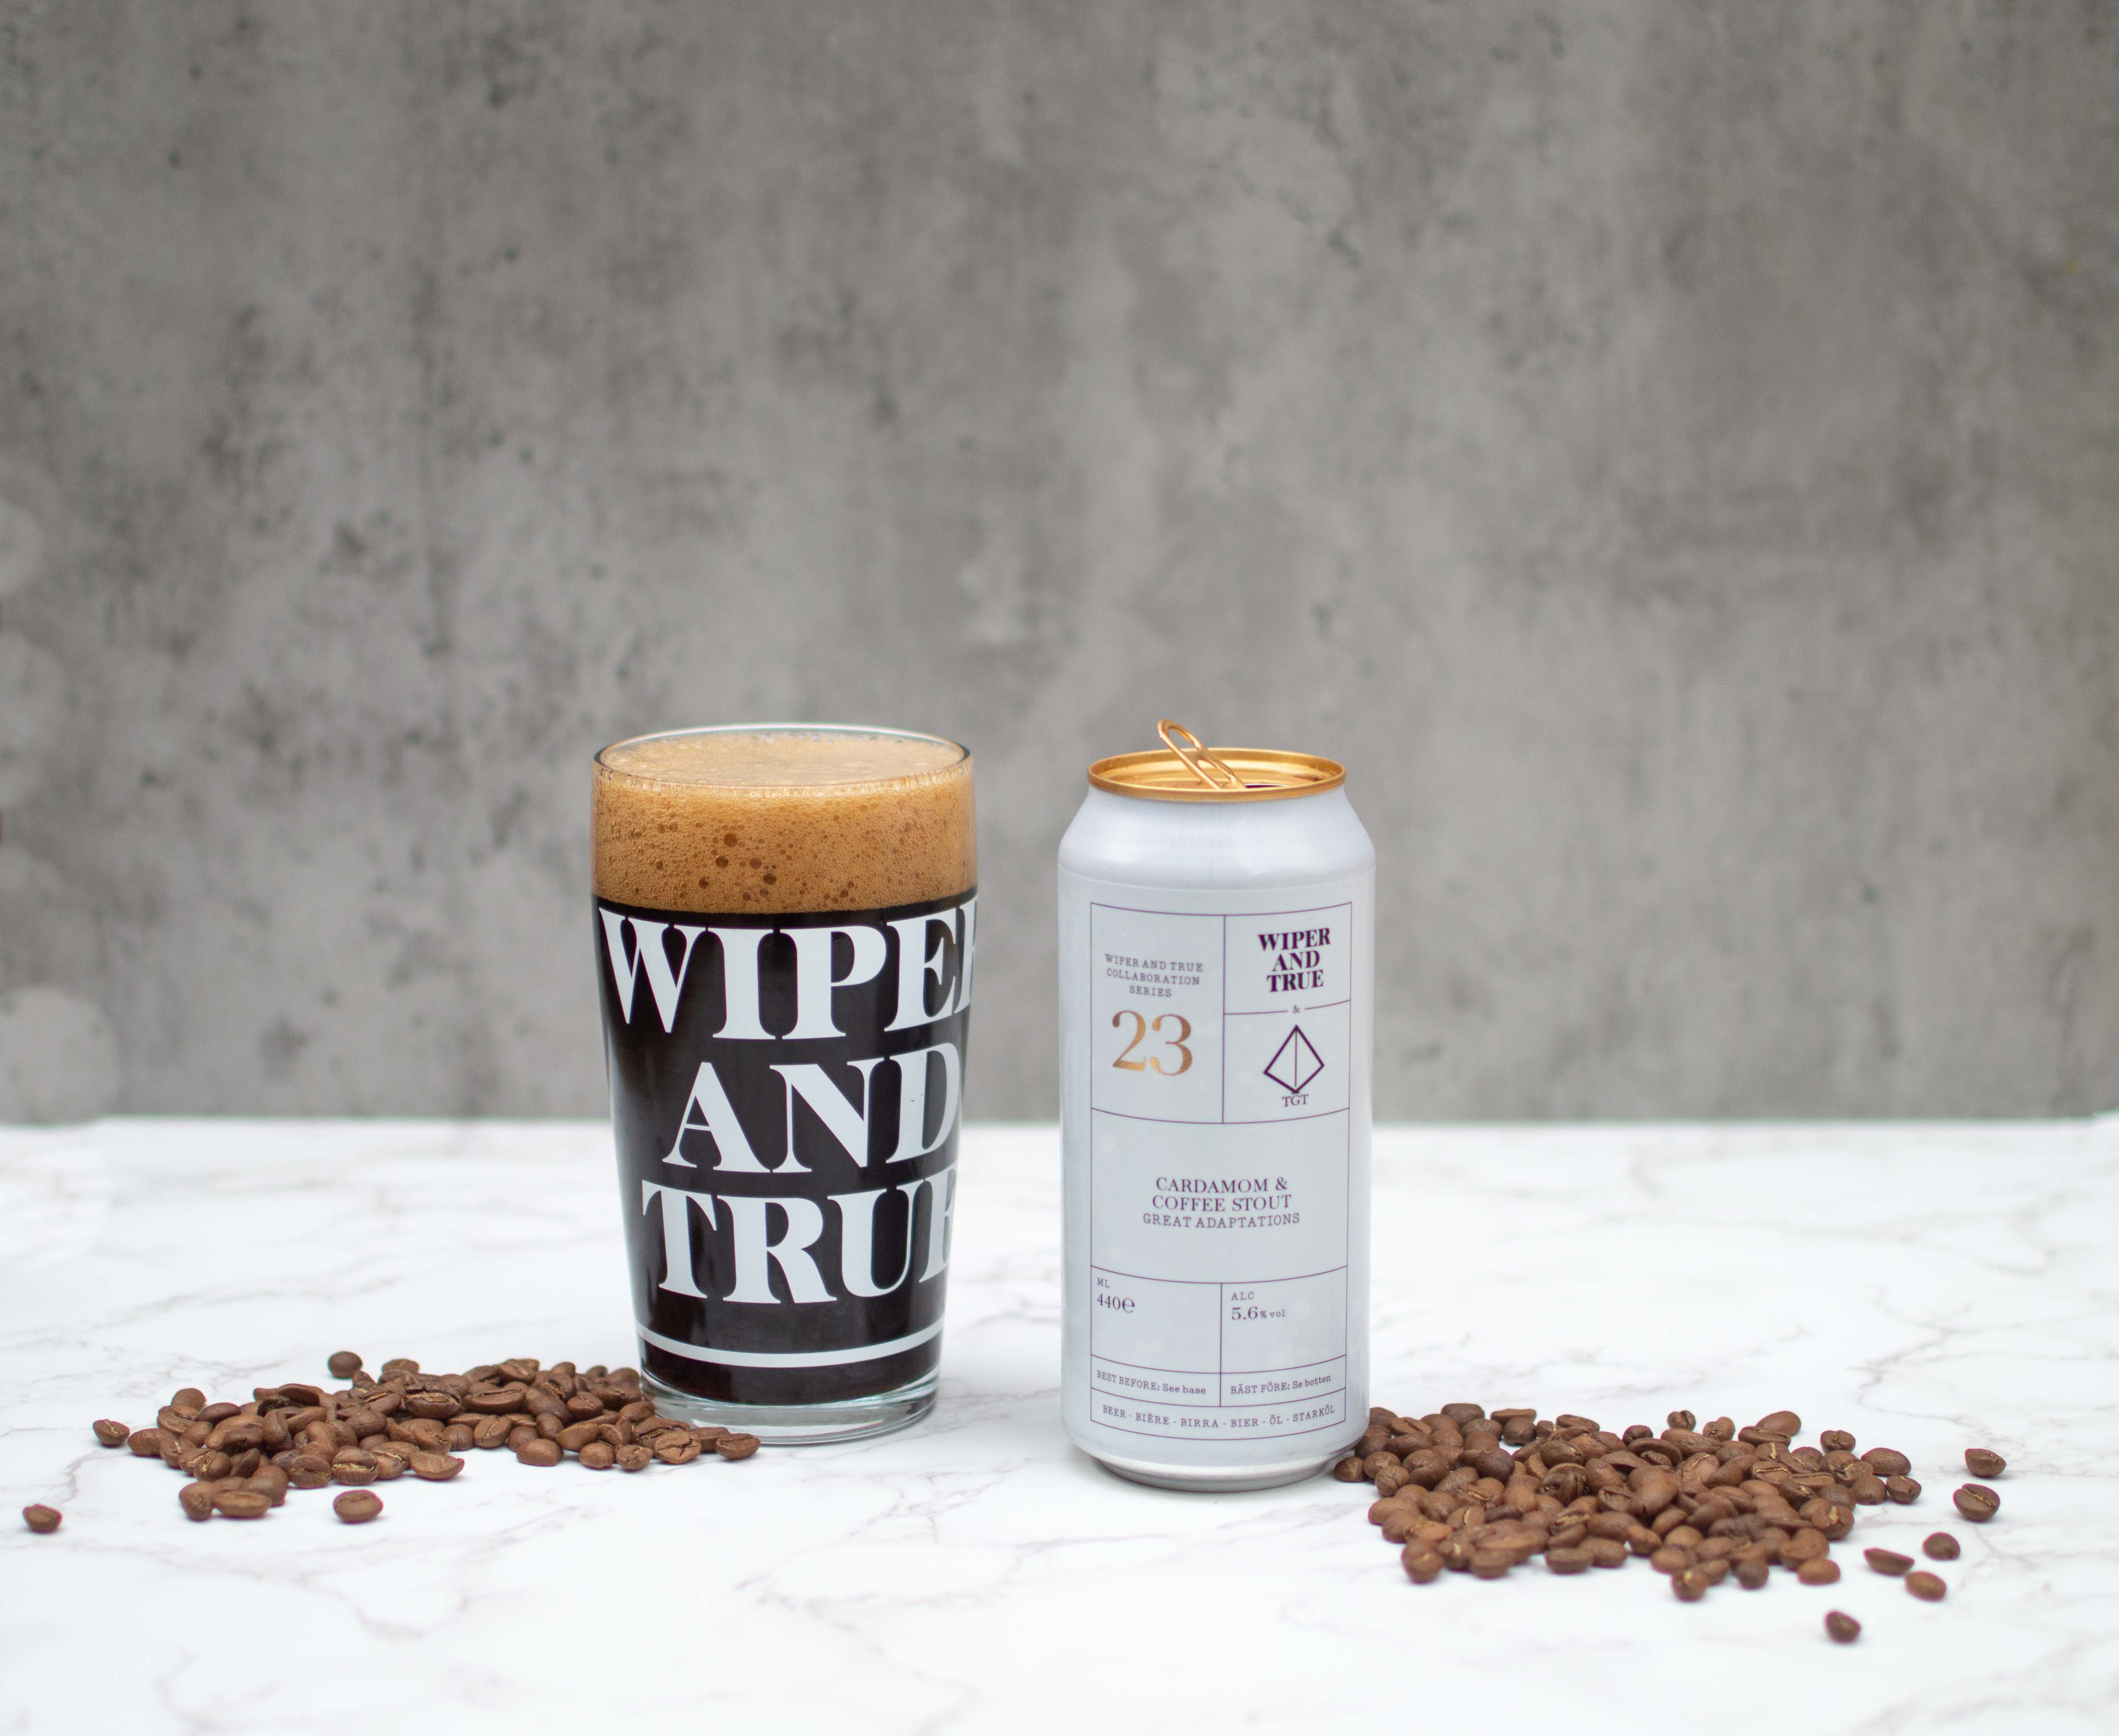 Great Adaptations Cardamom & Coffee Stout by Wiper and True & The Glacier Trust